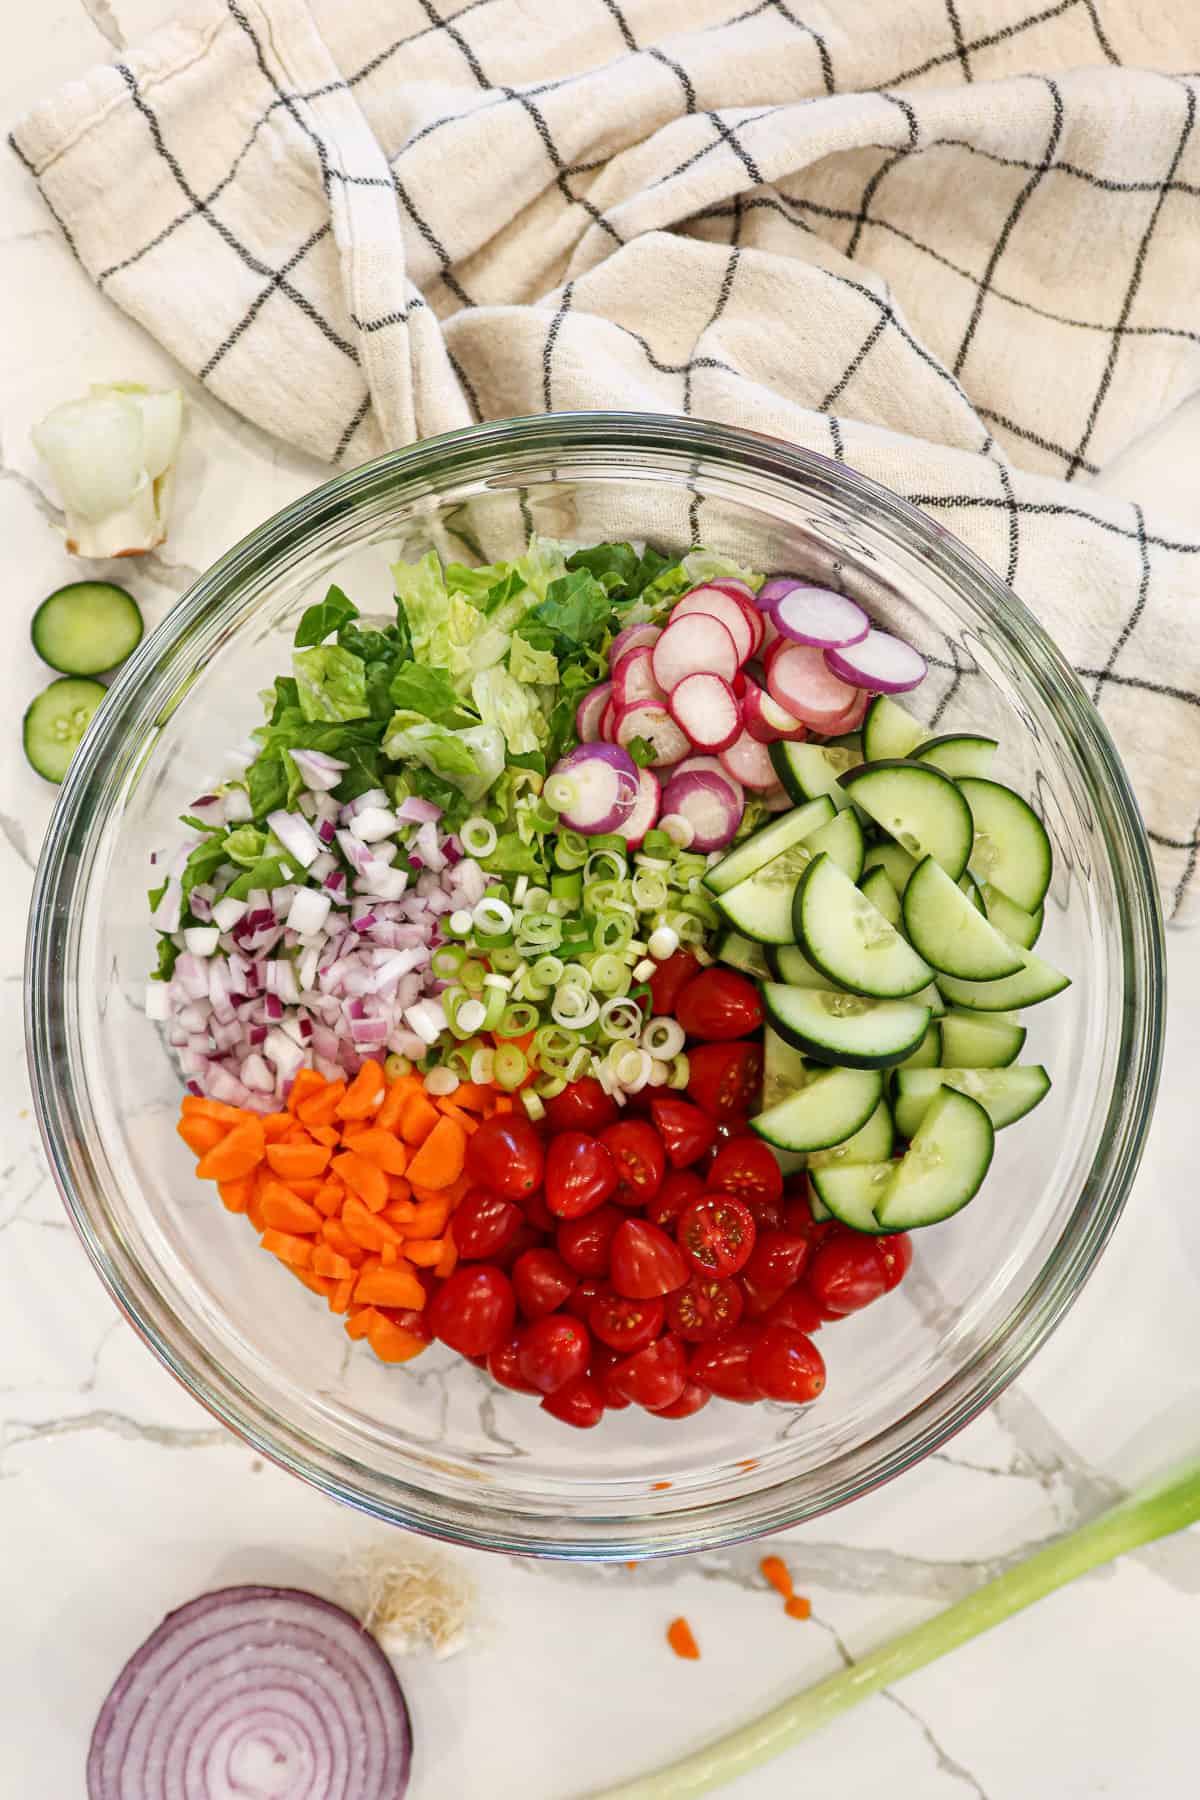 Garden salad ingredients measured into a glass mixing bowl.